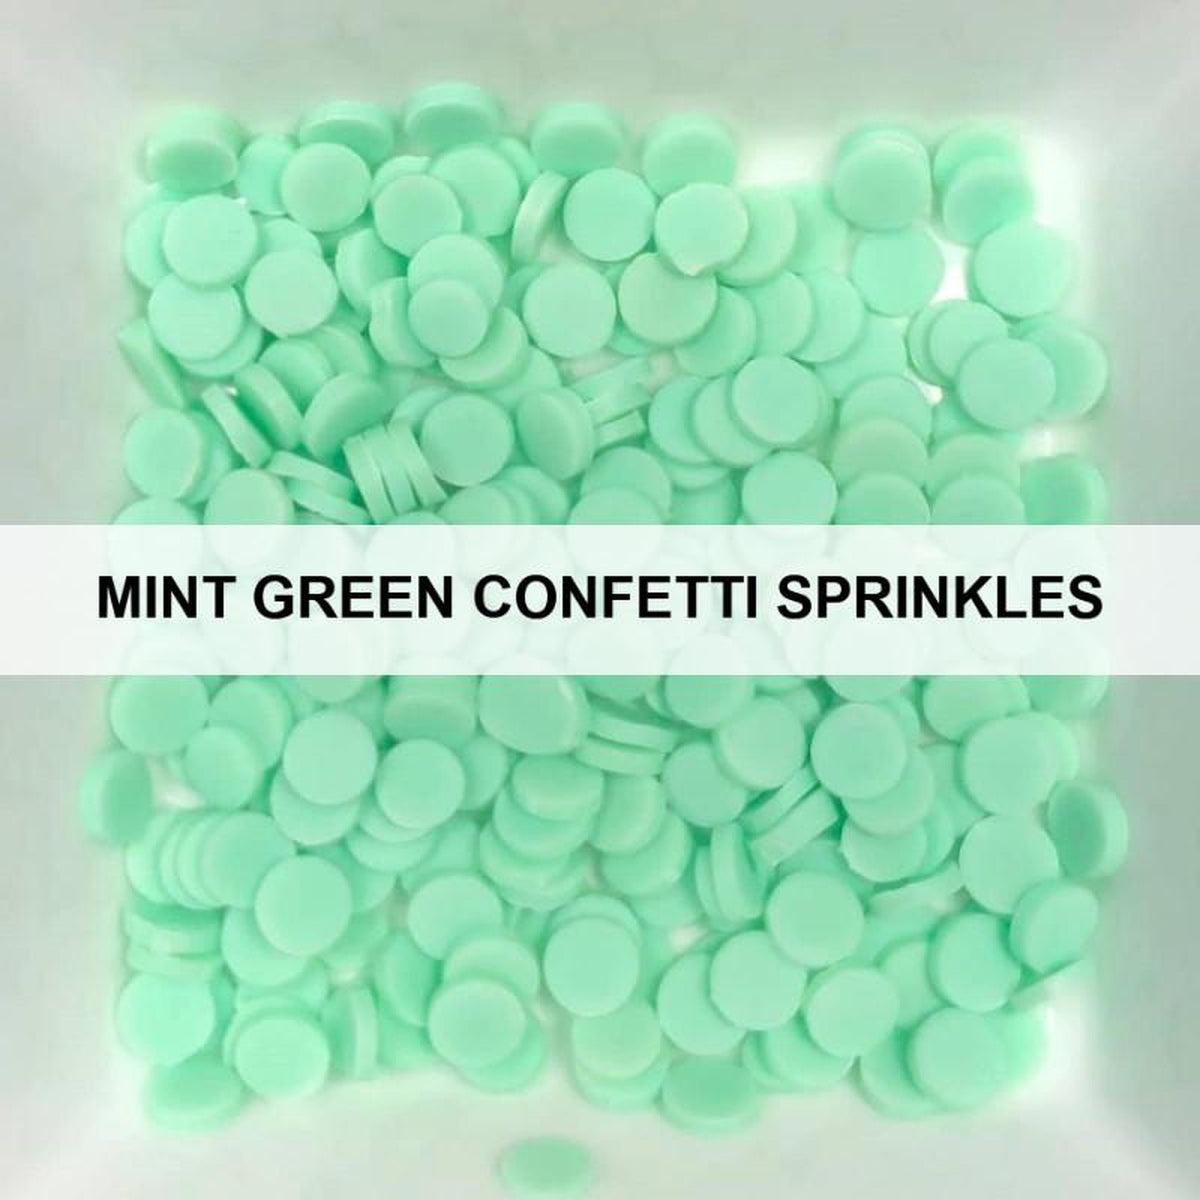 Mint Green Confetti Sprinkles by Kat Scrappiness - Kat Scrappiness